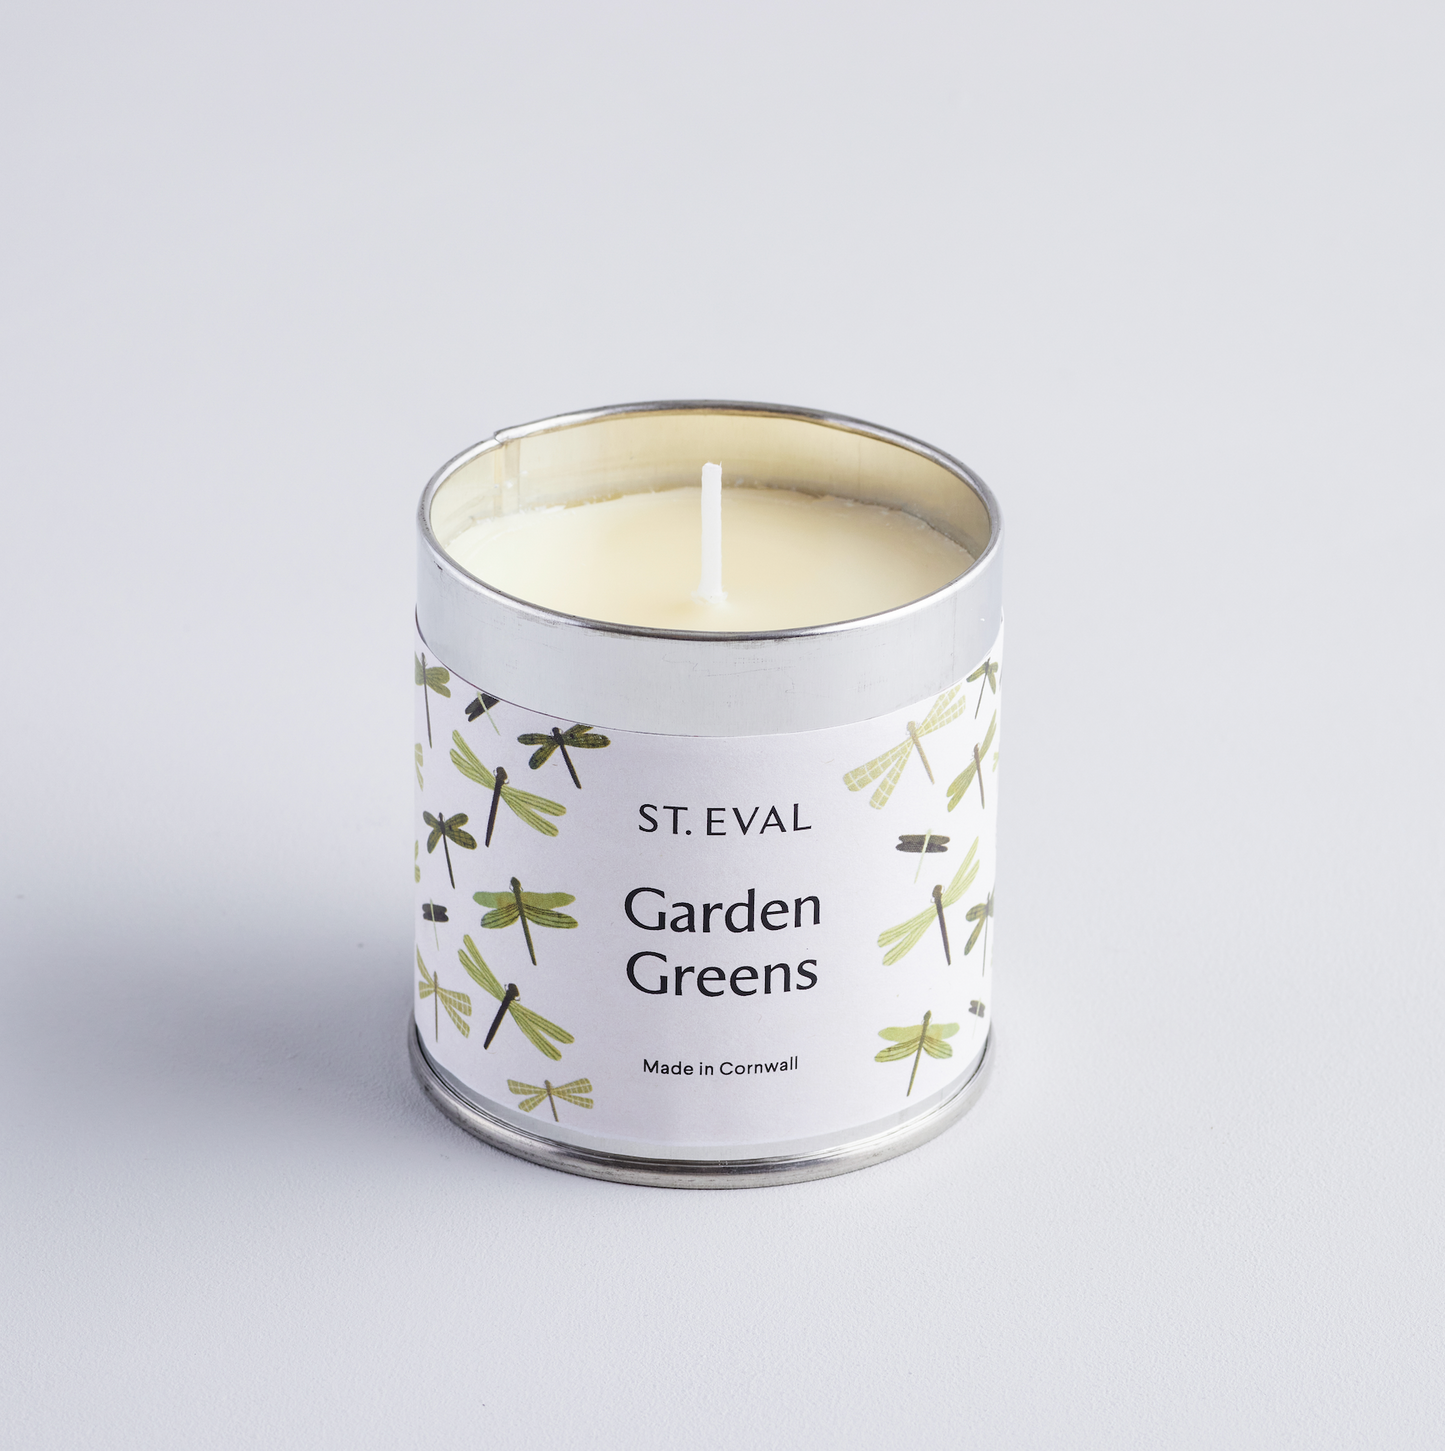 St Eval Garden Greens Scented Tin Candle